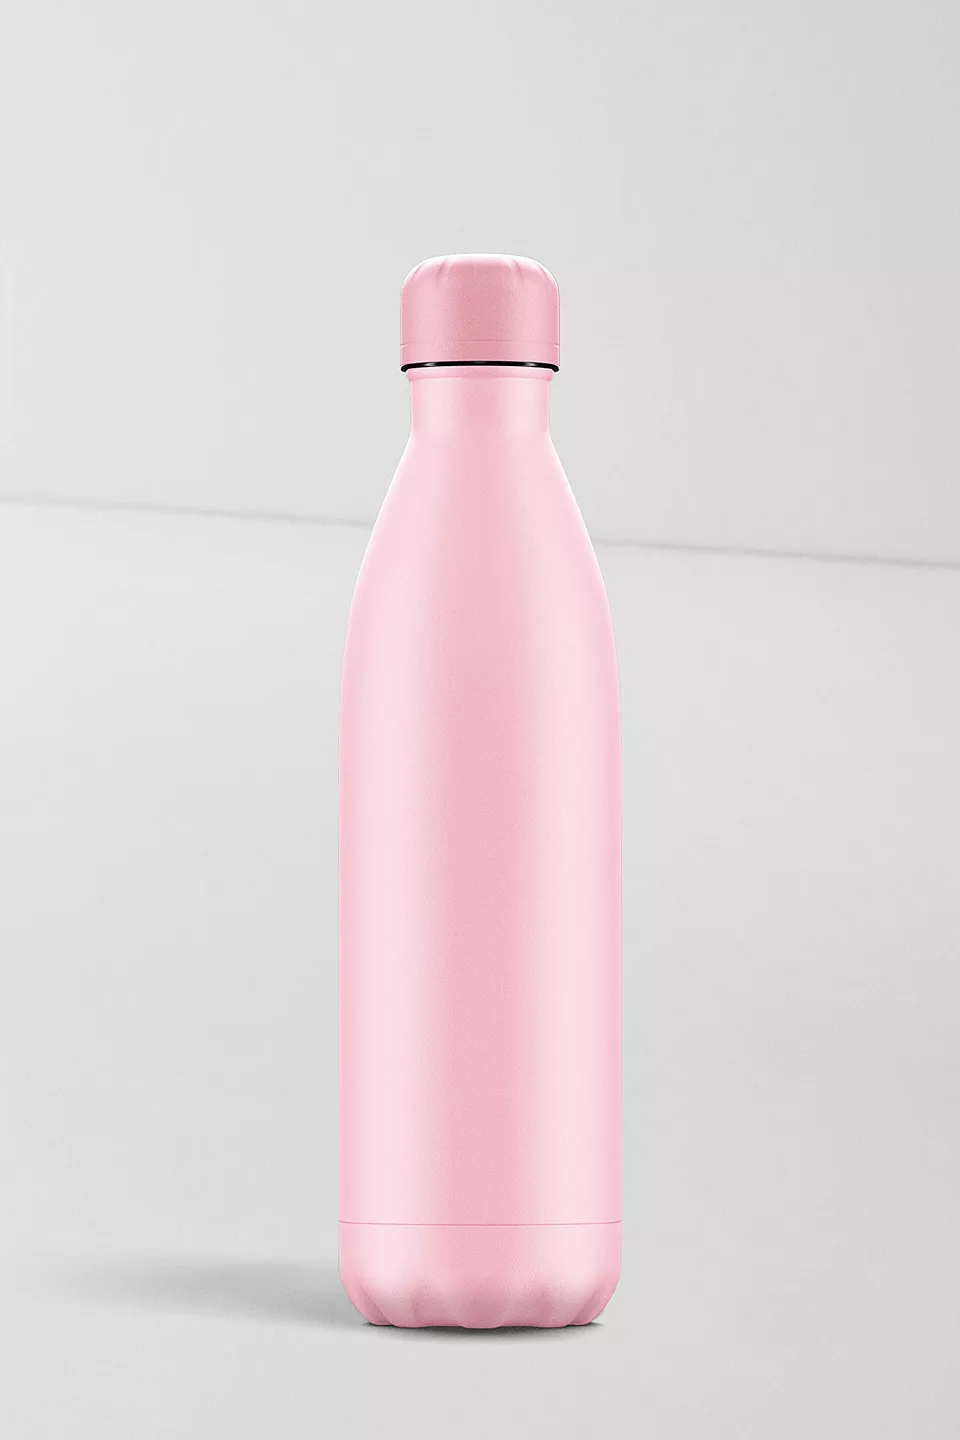 urbanoutfitters.com | All Pink 500ml